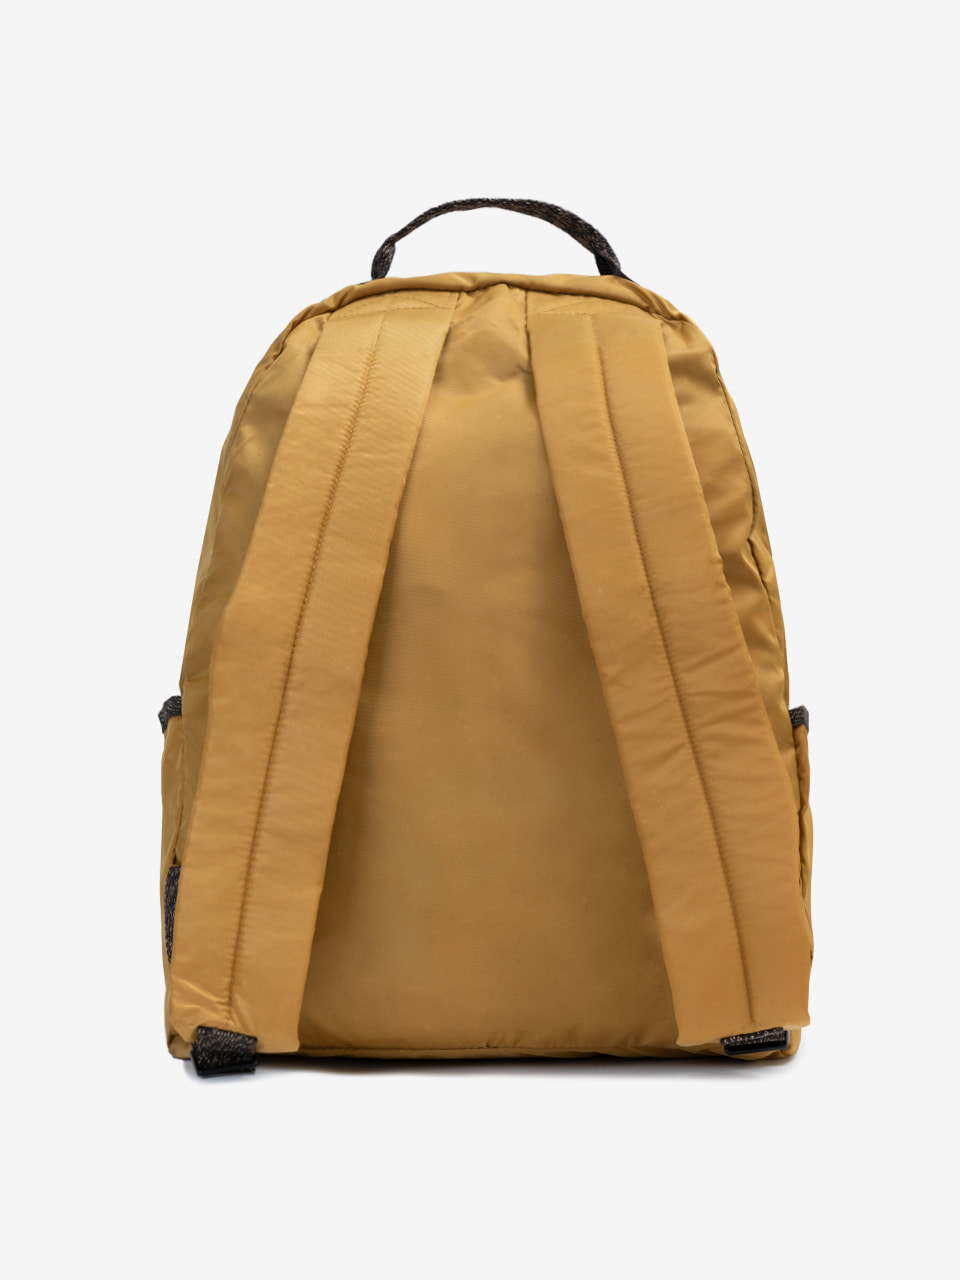 [PARIS COLLECTION] BACKPACK - CURRY